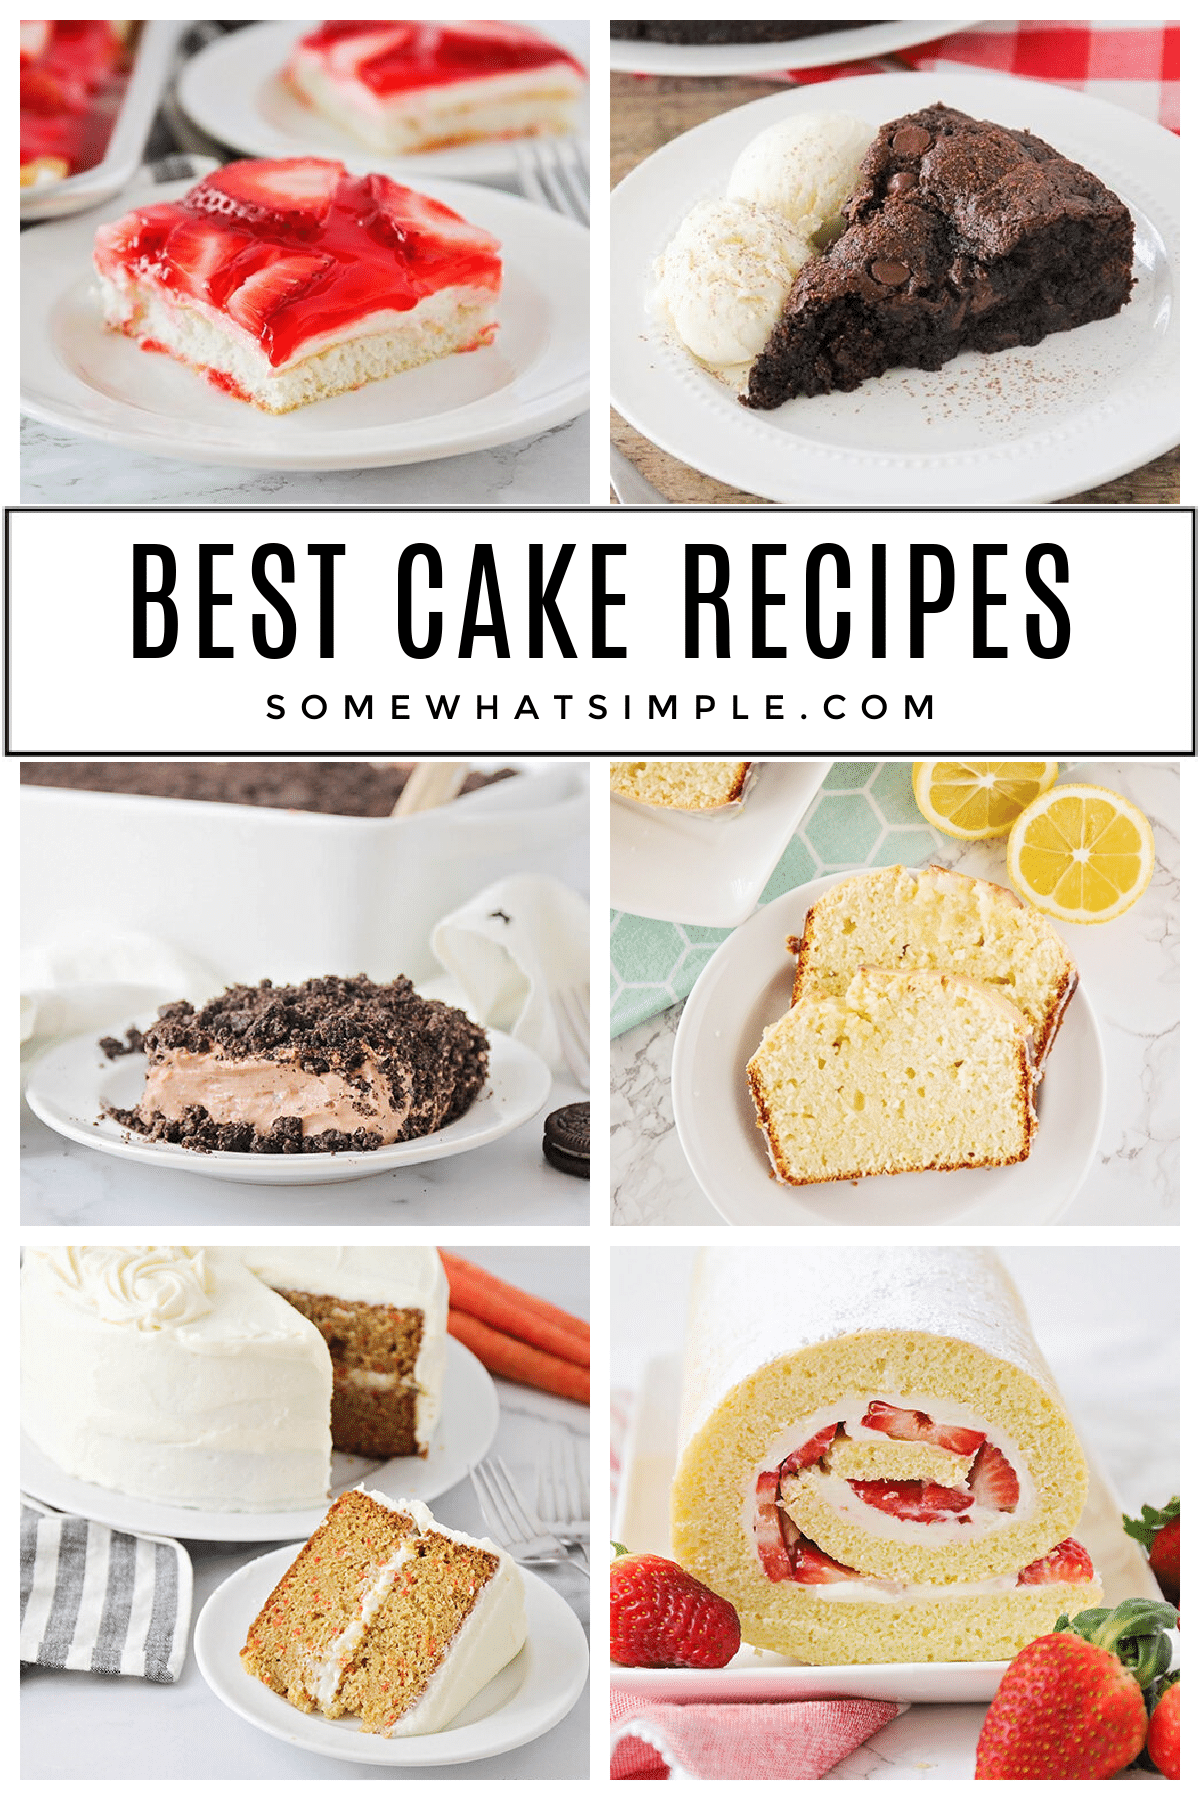 Have your cake and eat it too! Here are 20 of our favorite cake recipes for every season and celebration! via @somewhatsimple